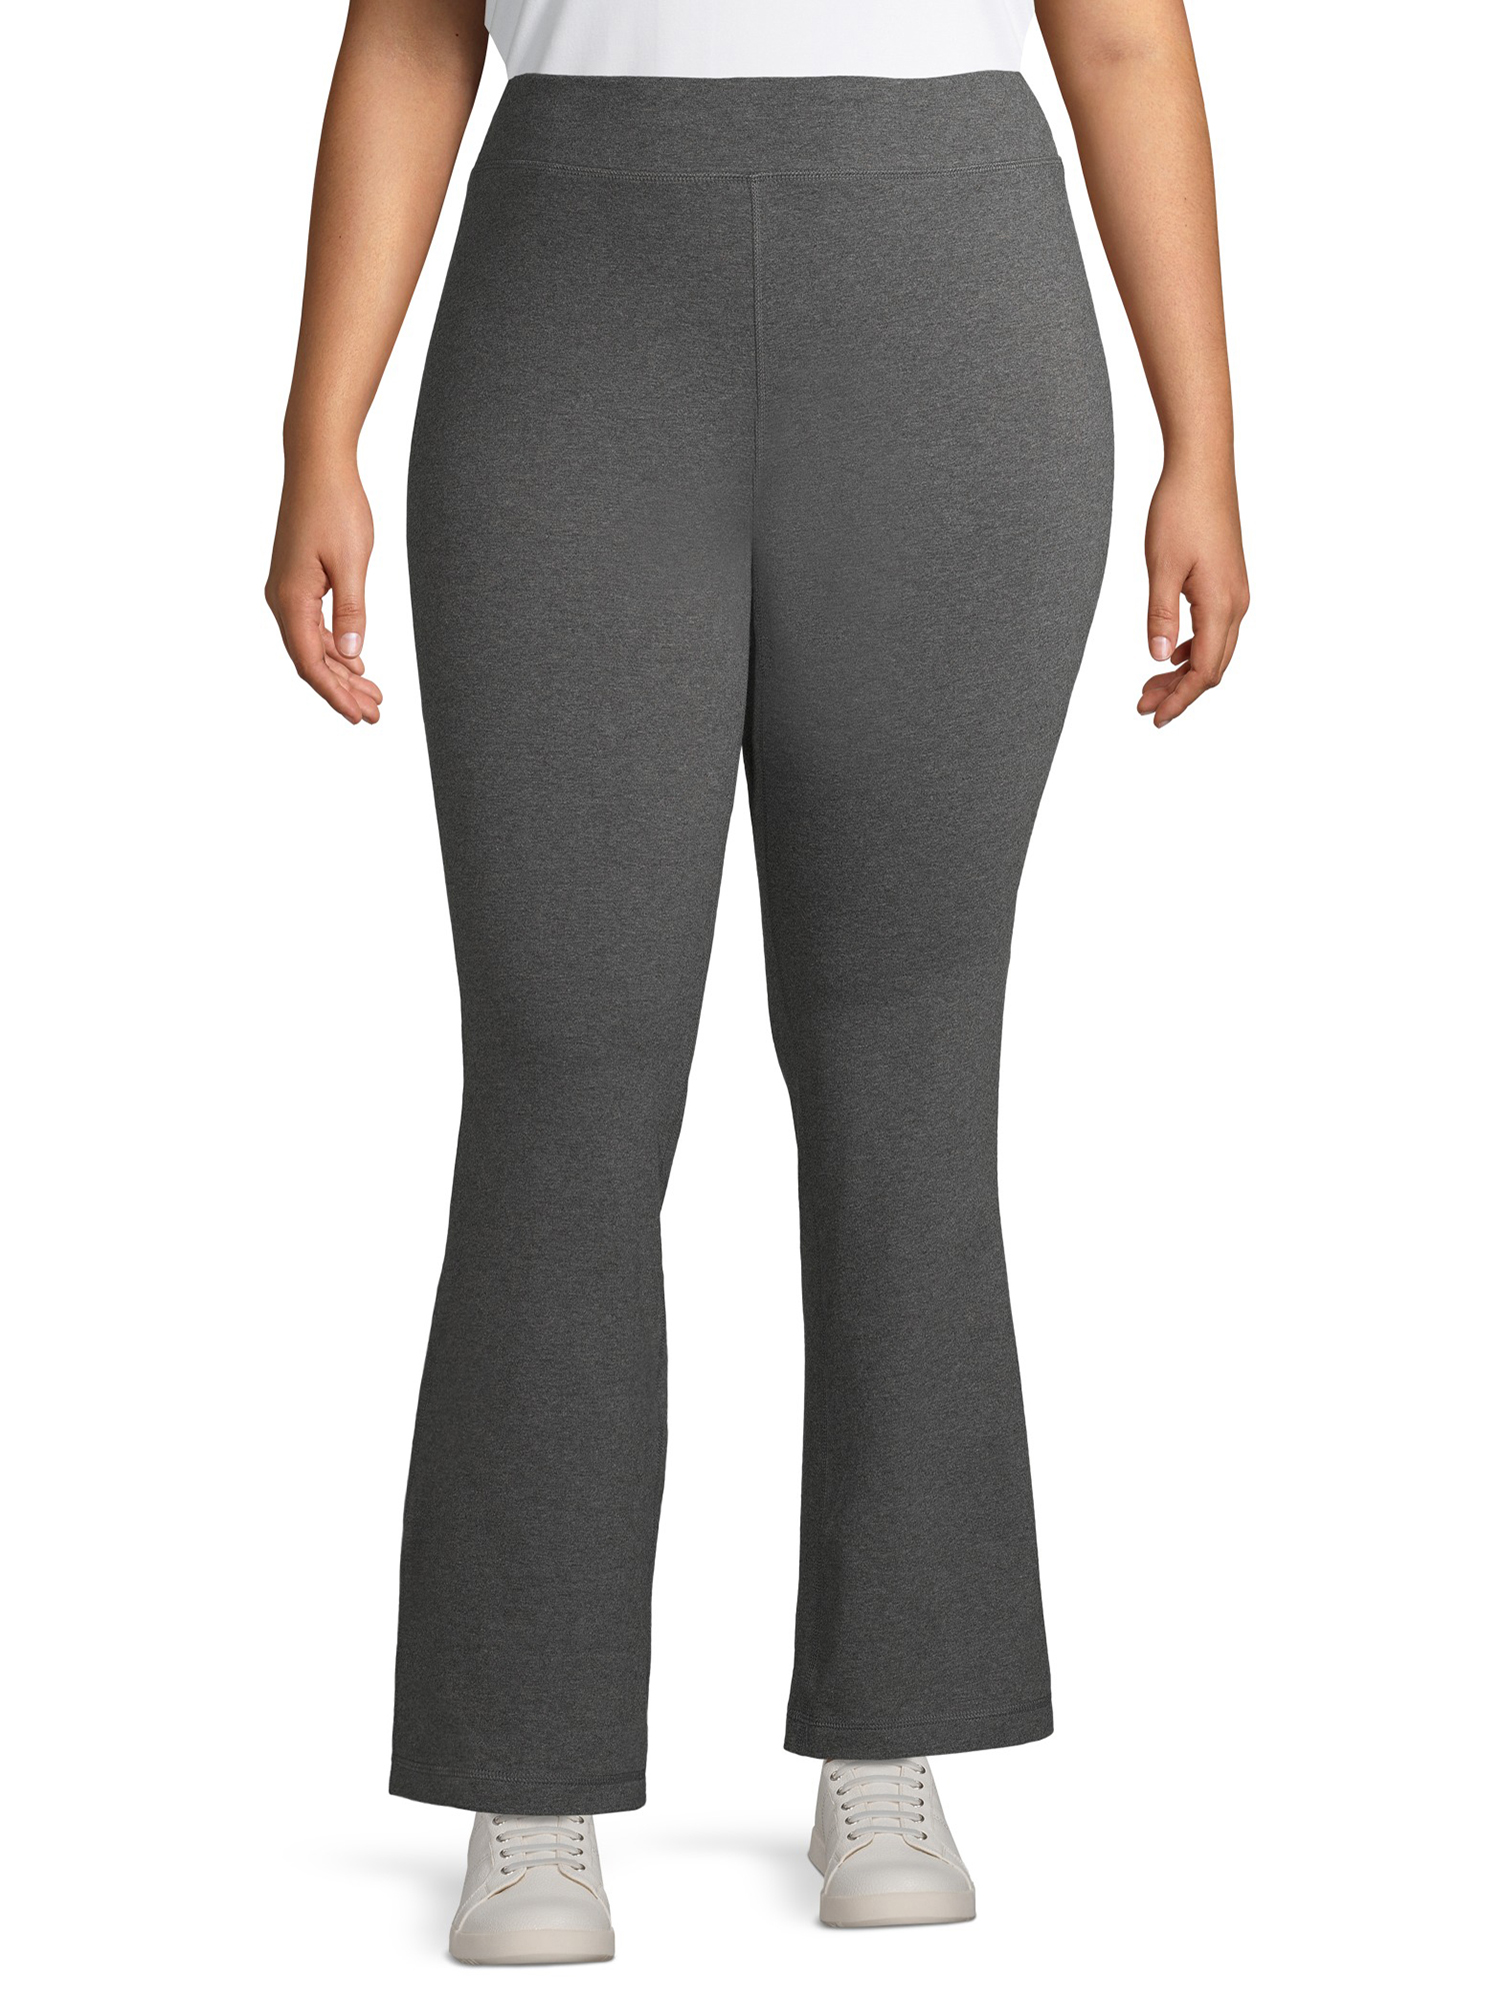 Athletic Works Women’s and Women's Plus Stretch Cotton Blend Straight Leg Pants - image 1 of 7